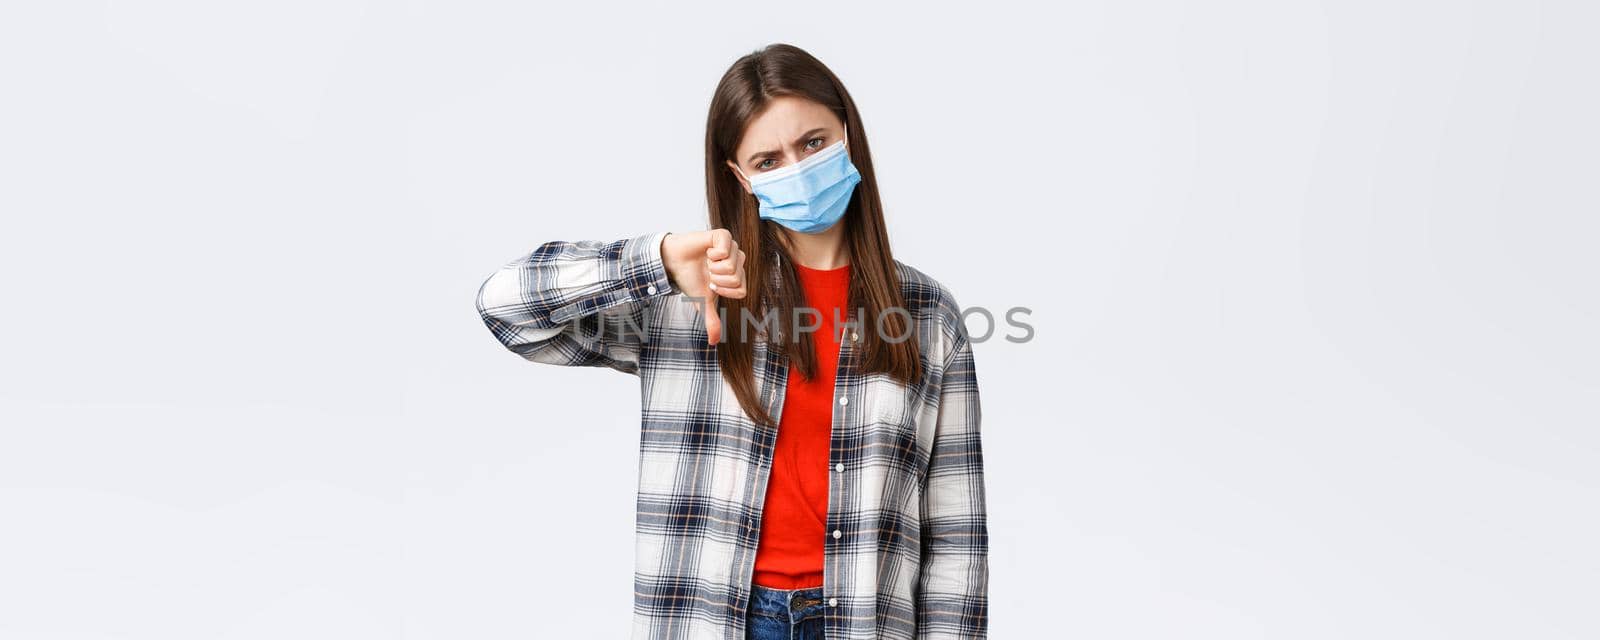 Coronavirus outbreak, leisure on quarantine, social distancing and emotions concept. Lame bad idea. Displeased and unamused young woman in medical mask thumb-down in disapproval by Benzoix